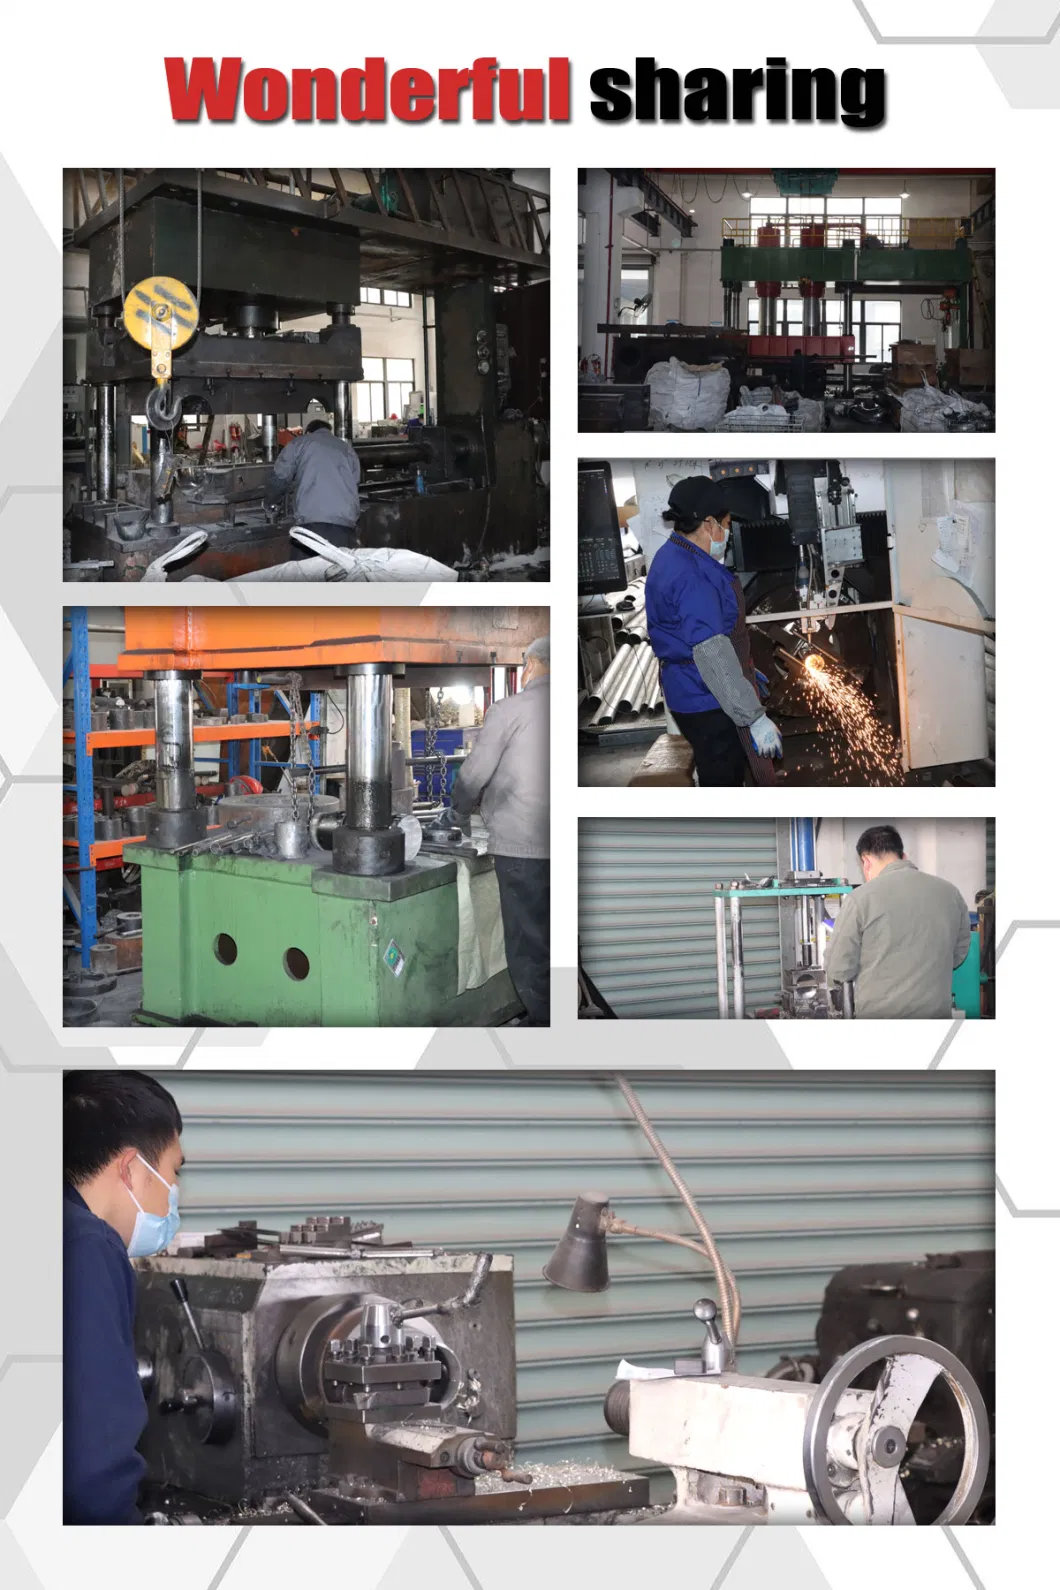 Stainless Steel Hygienic SMS Threaded Rotary Cleaning Ball for Tank